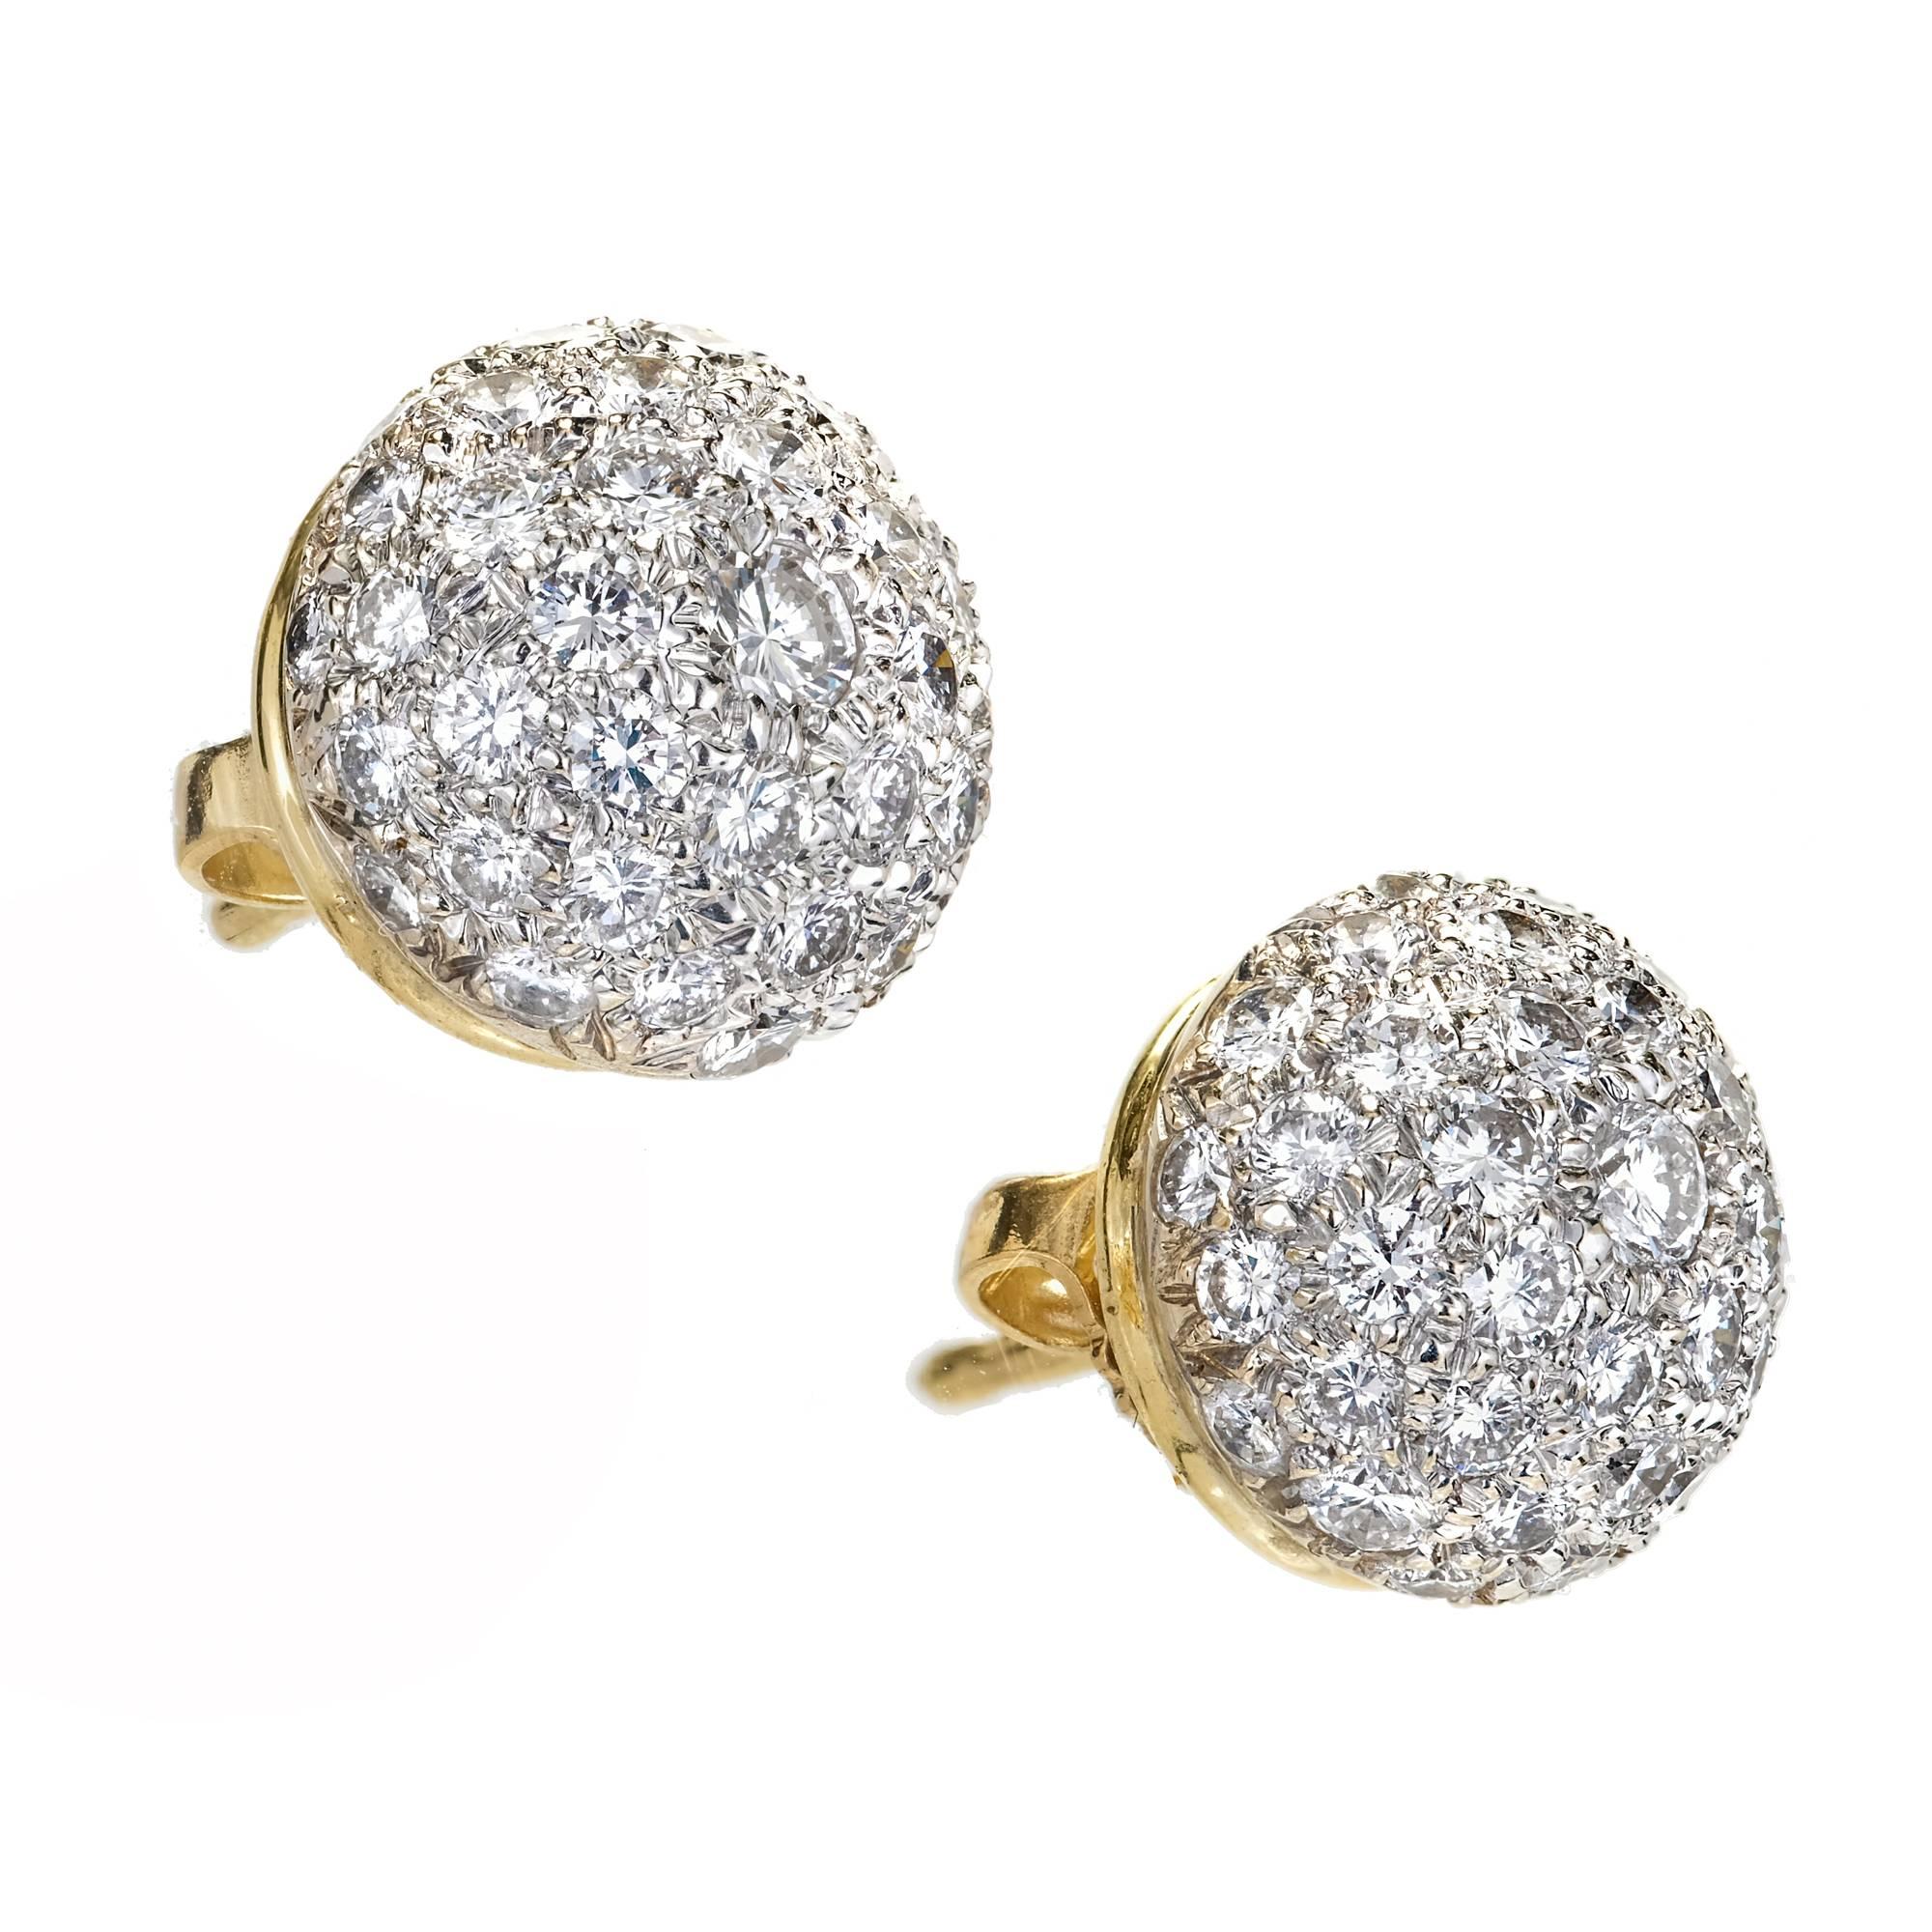 2.75 Carat Diamond Domed Pave White Gold Earrings